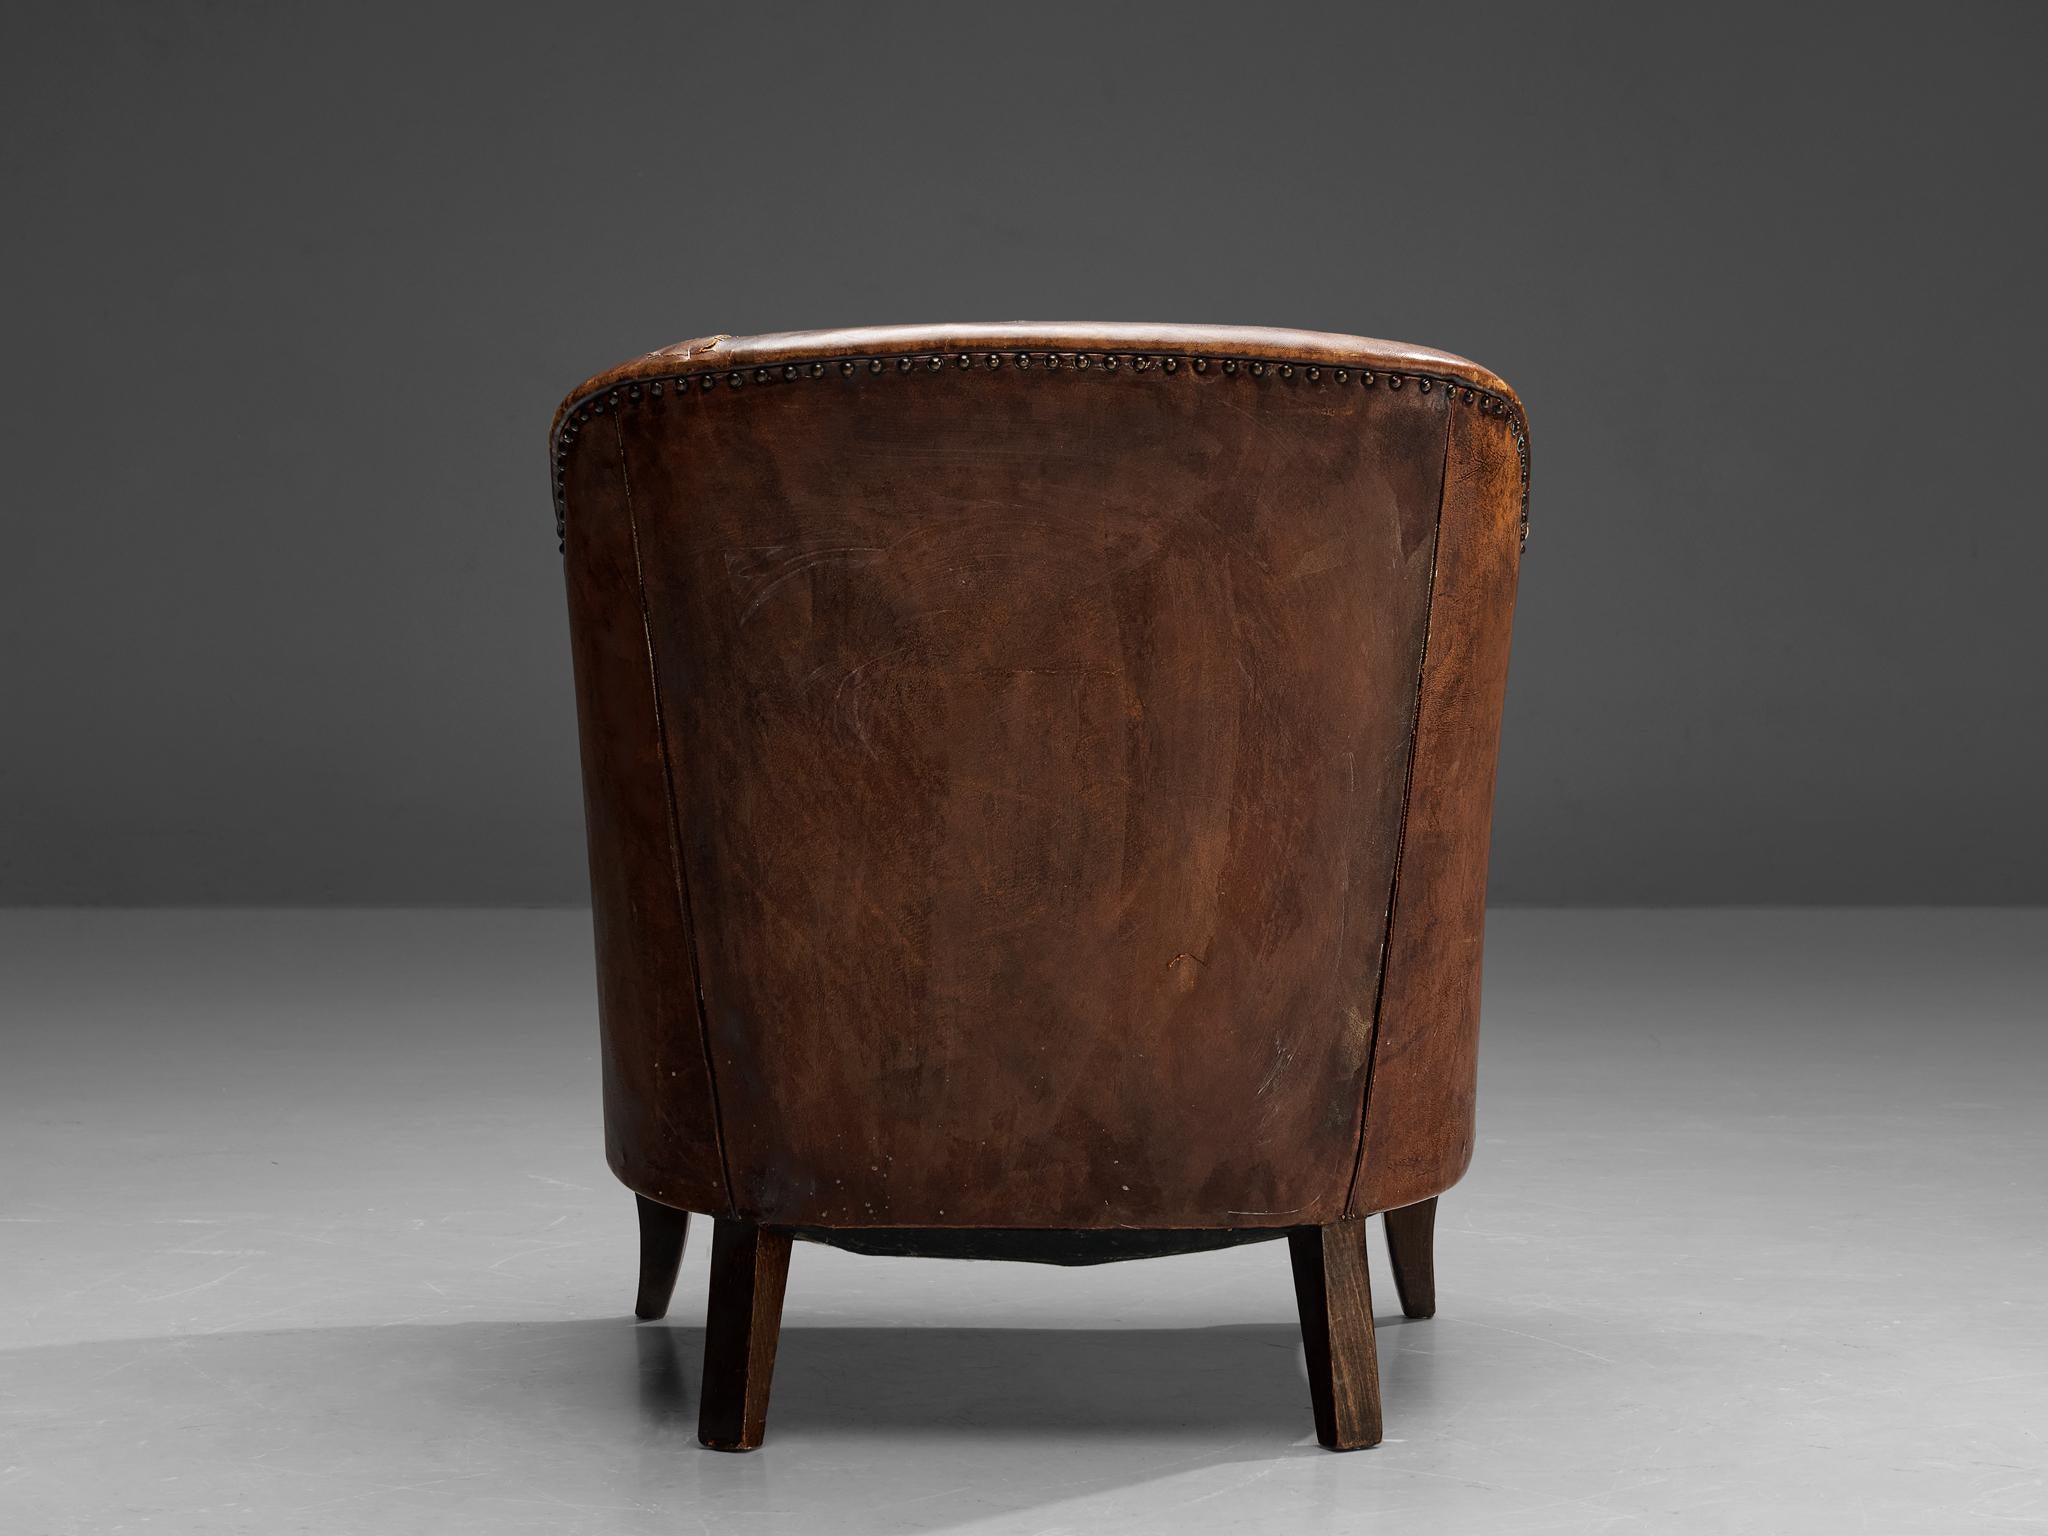 Mid-20th Century Scandinavian Club Chair in Patinated Cognac Leather For Sale